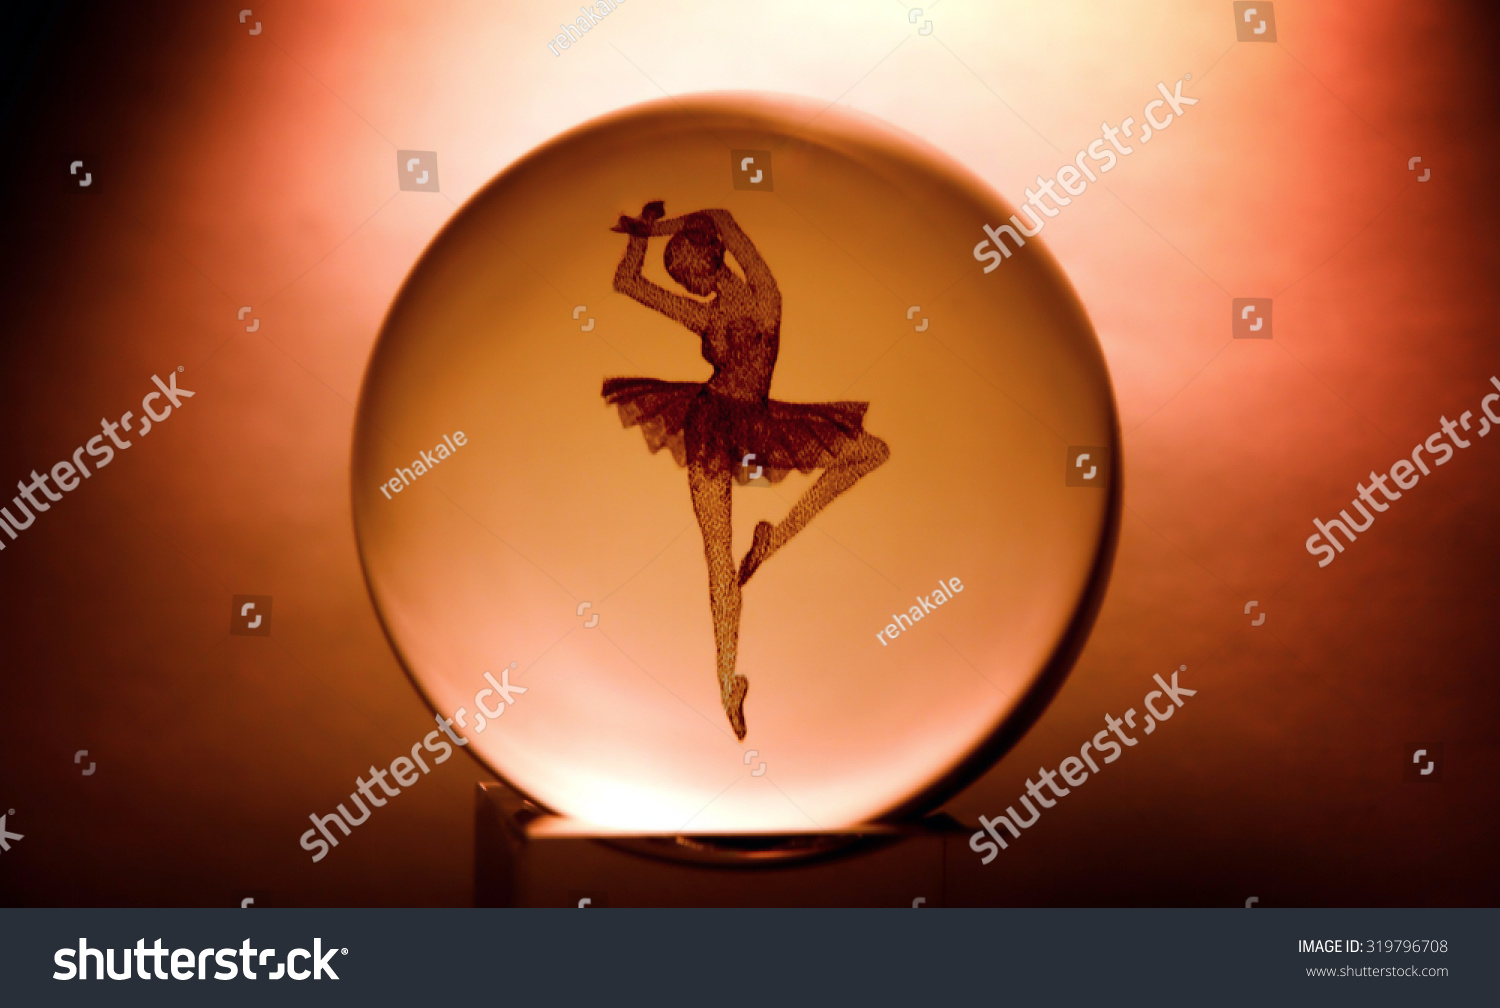 Ballerina the Spinning Dancer Known Stock Photo Now) 319796708